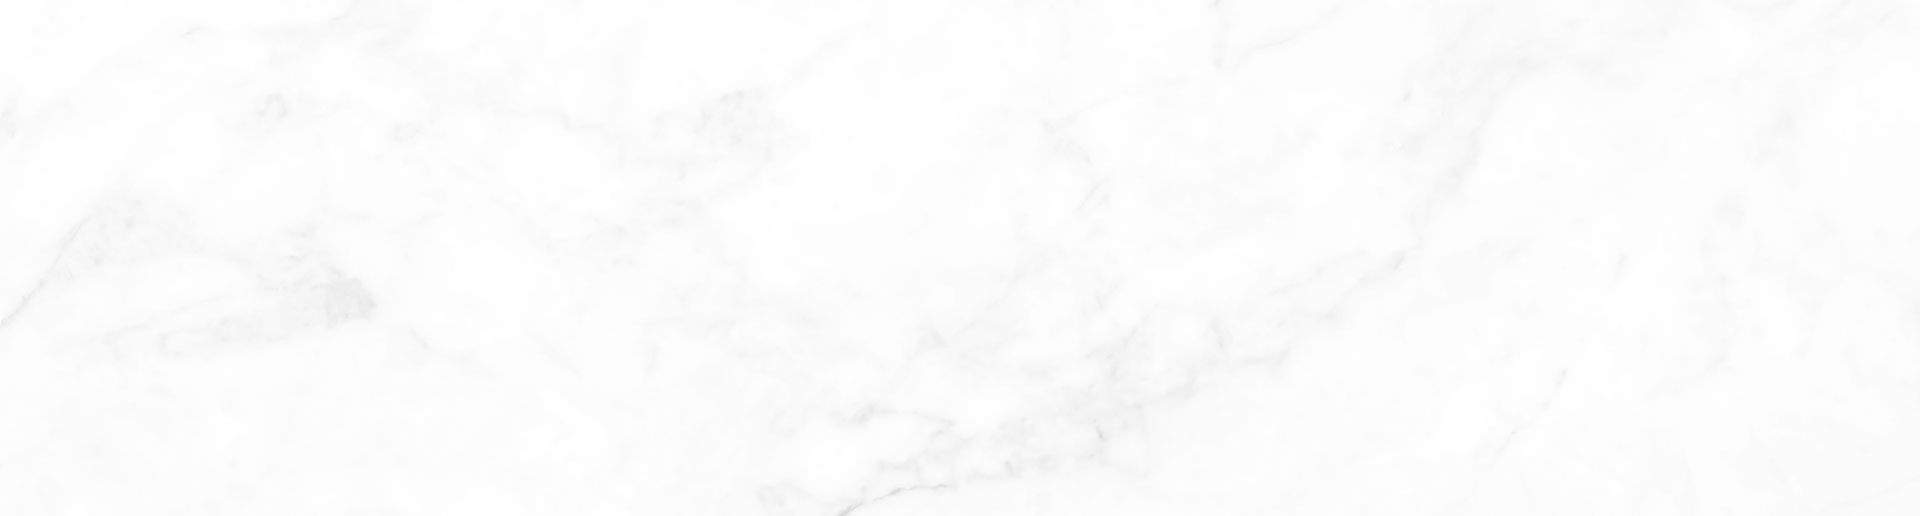 Marble pattern background image